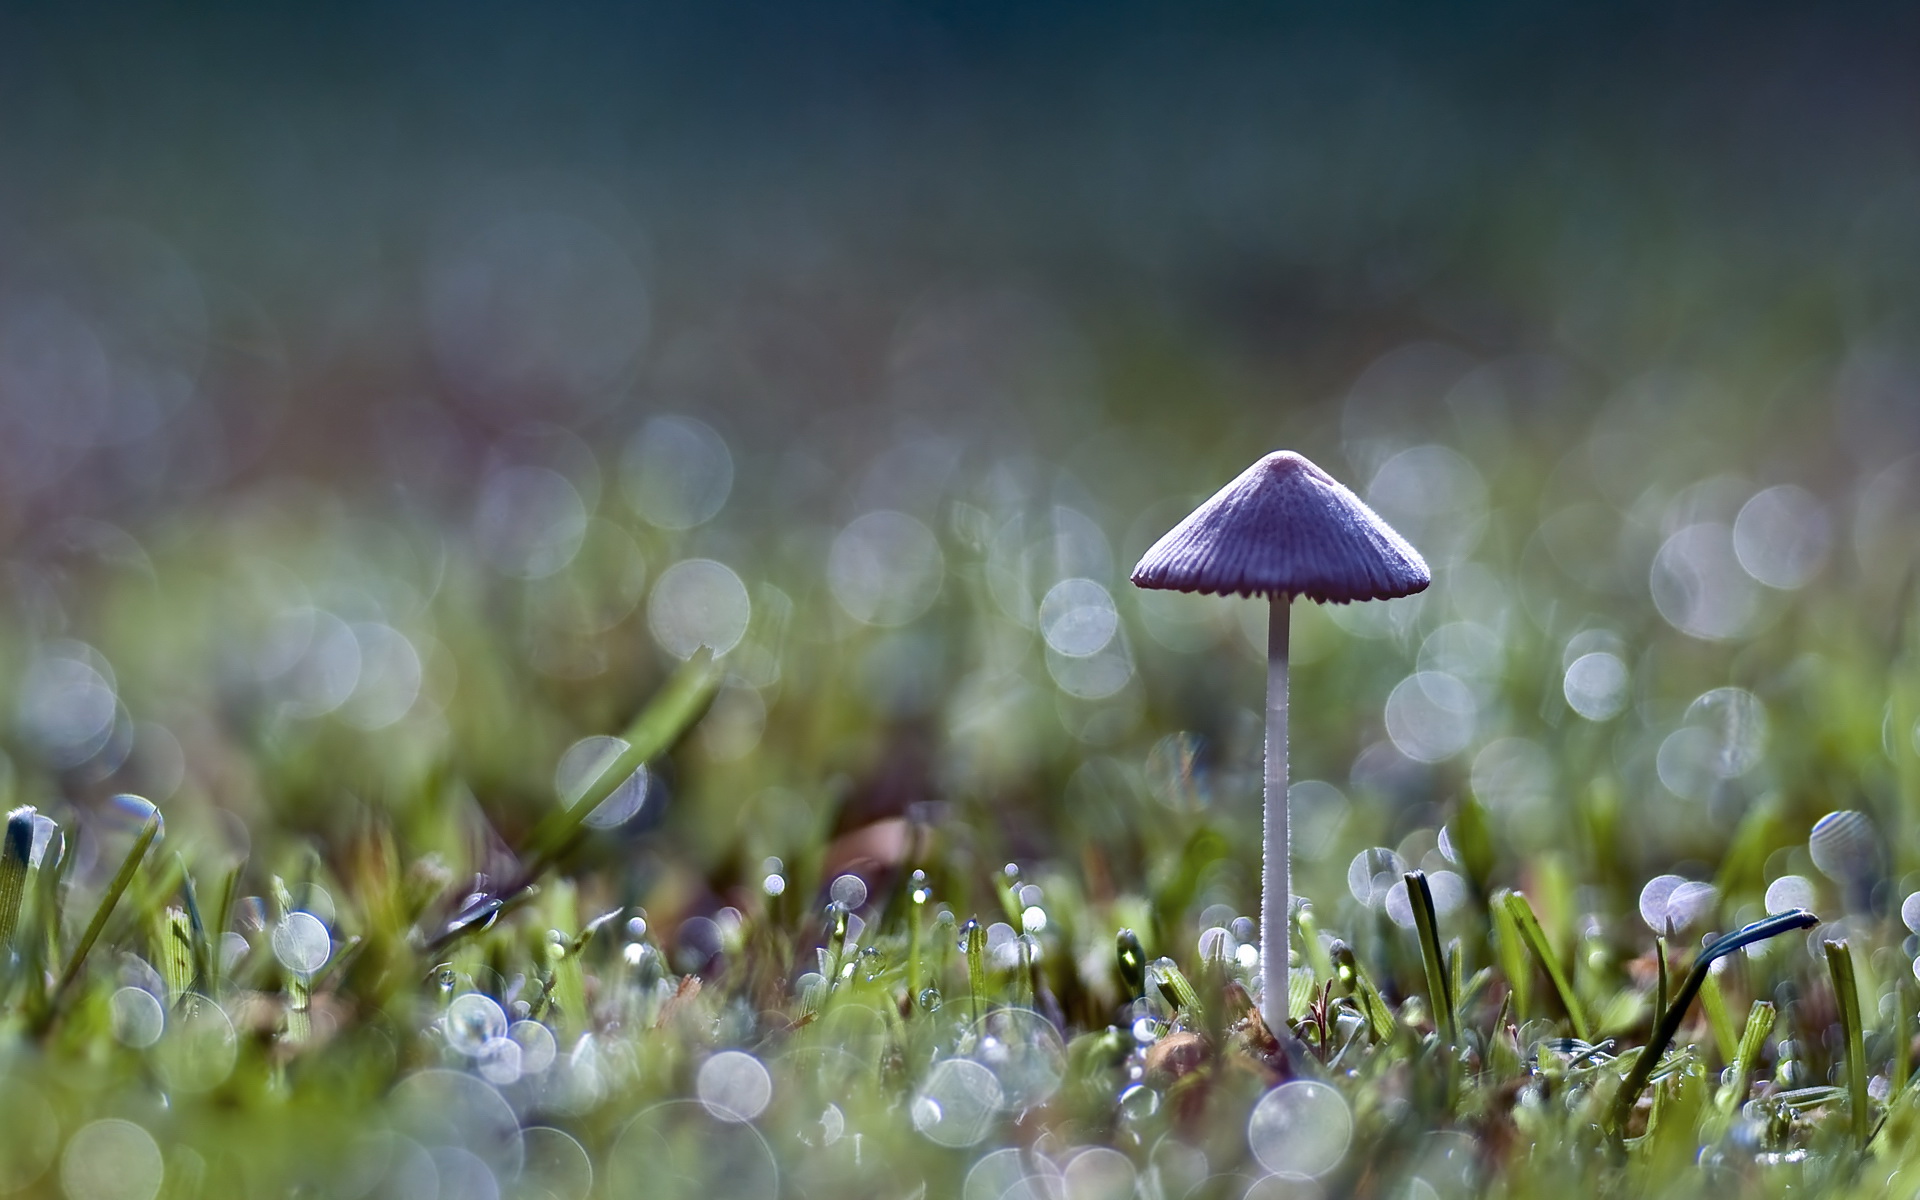 Lonely Mushroom Wallpaper And Image Pictures Photos